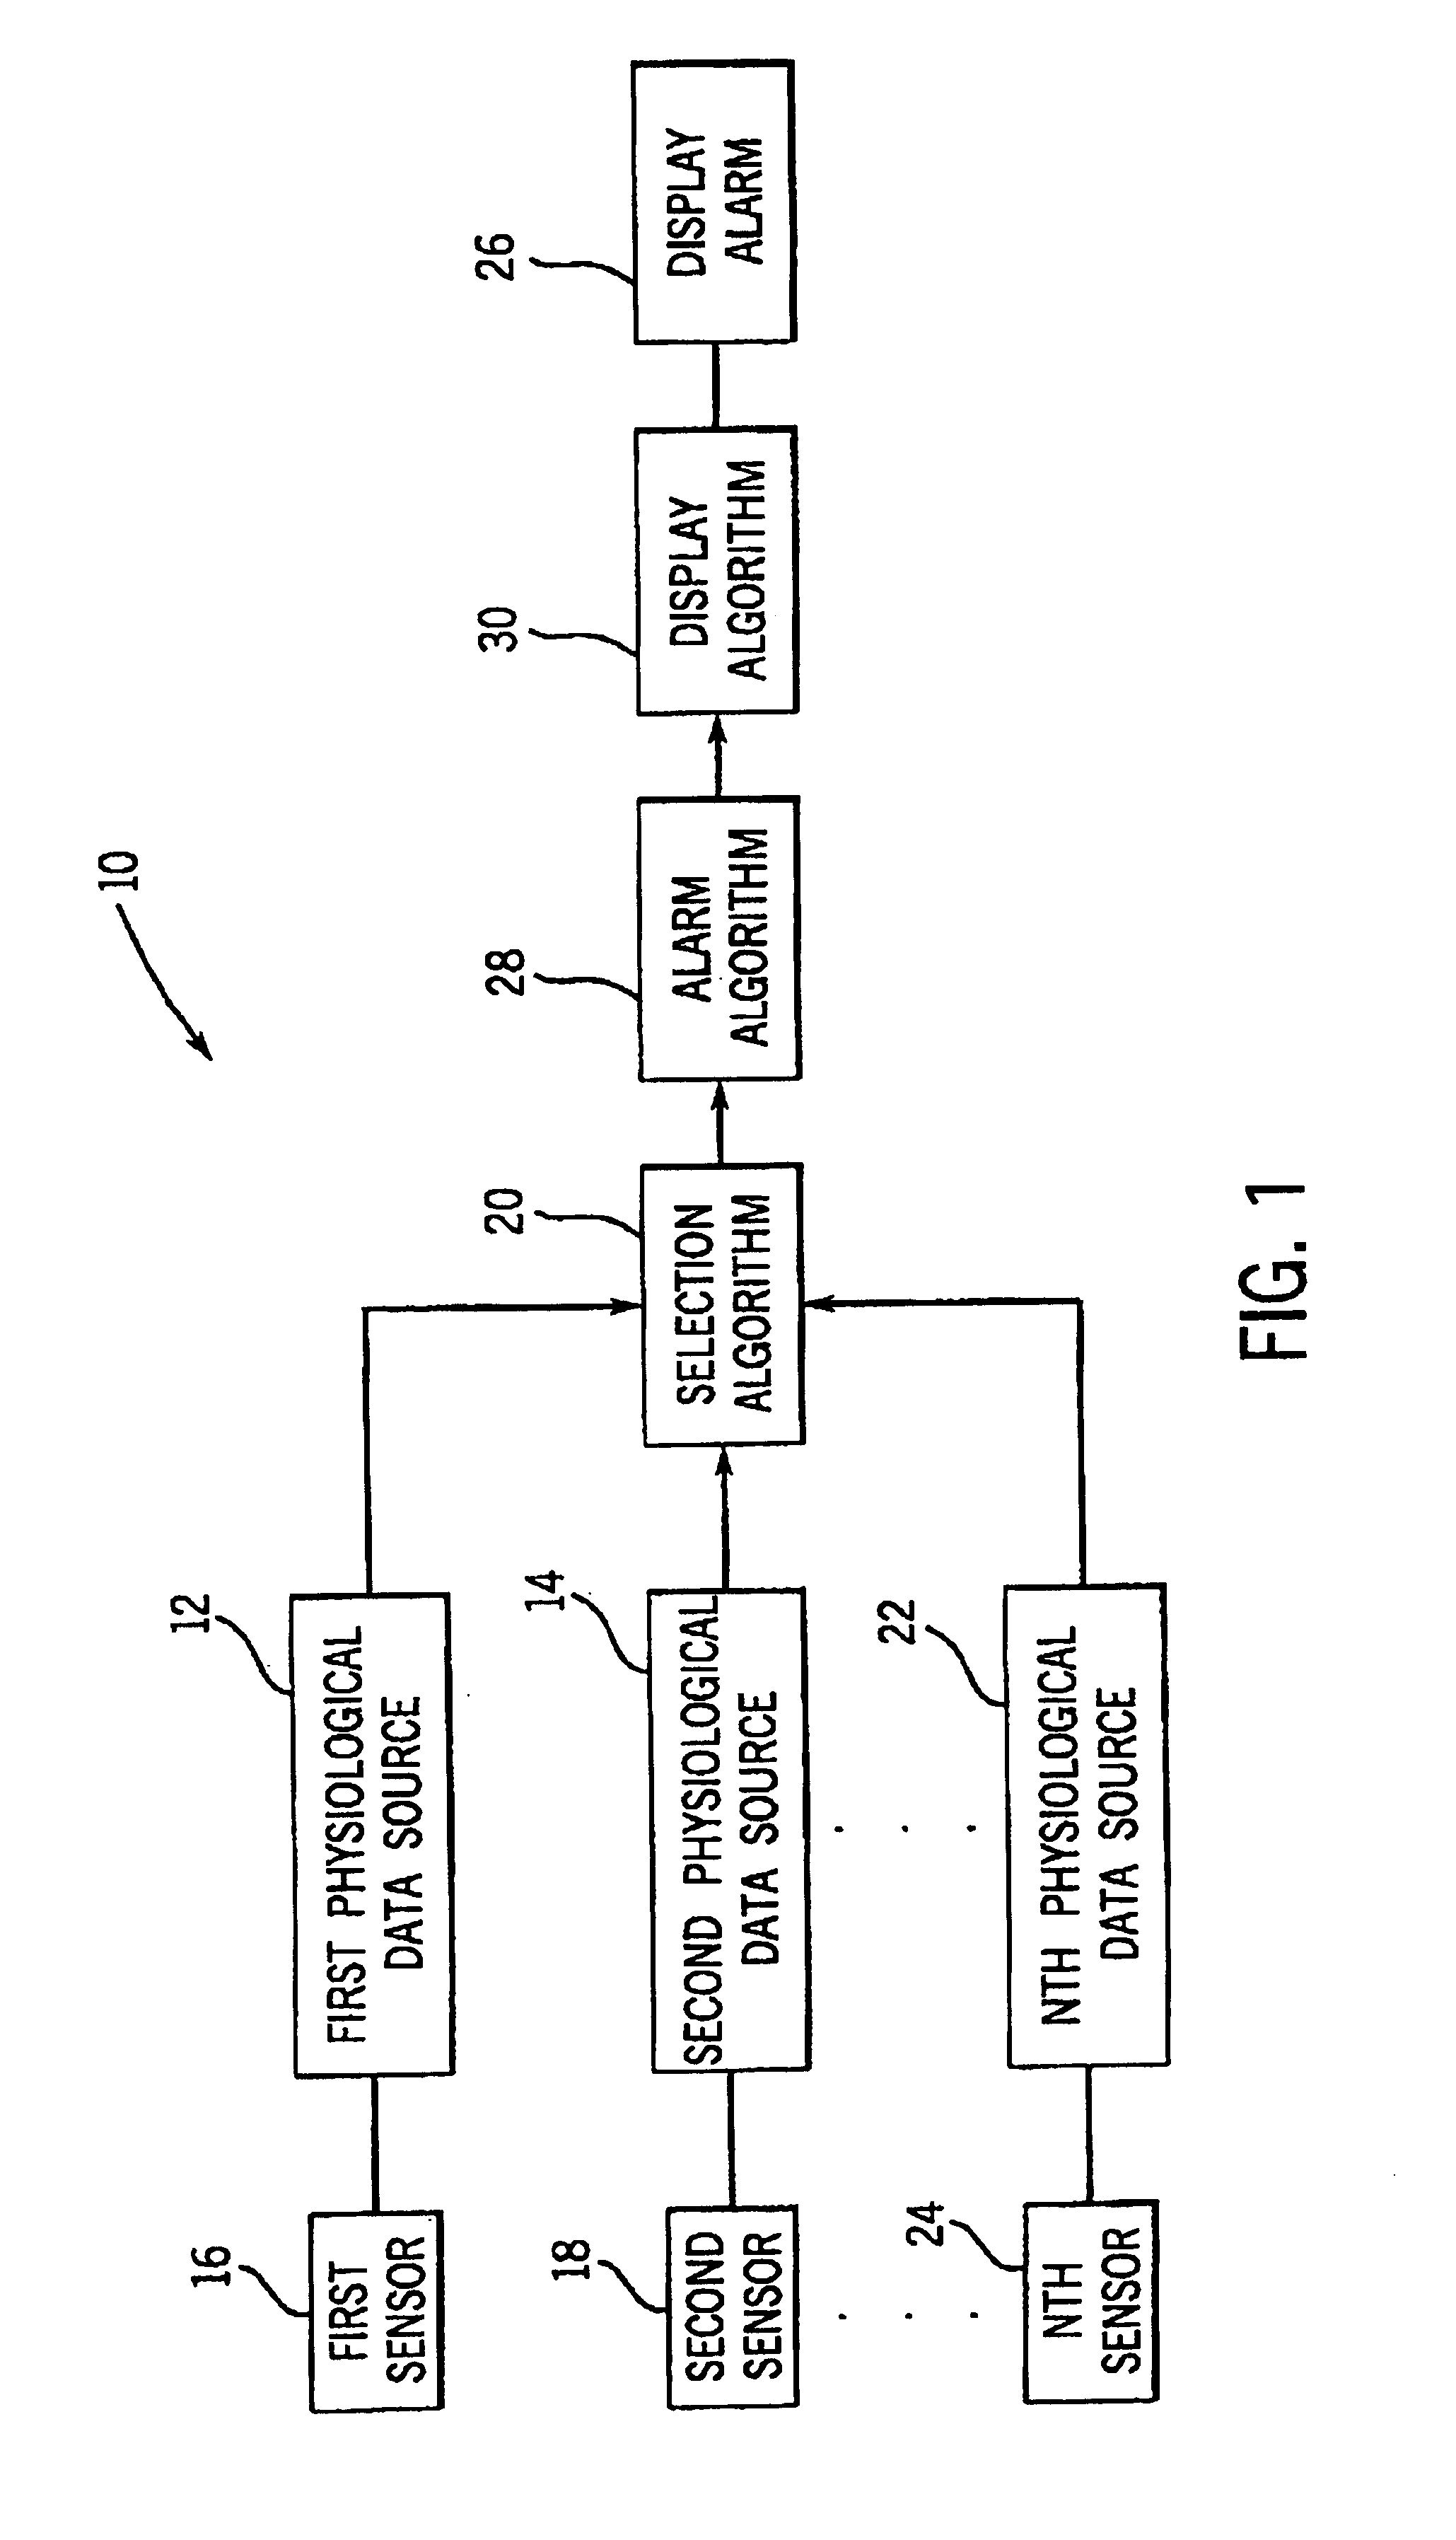 System and method for selecting physiological data from a plurality of physiological data sources